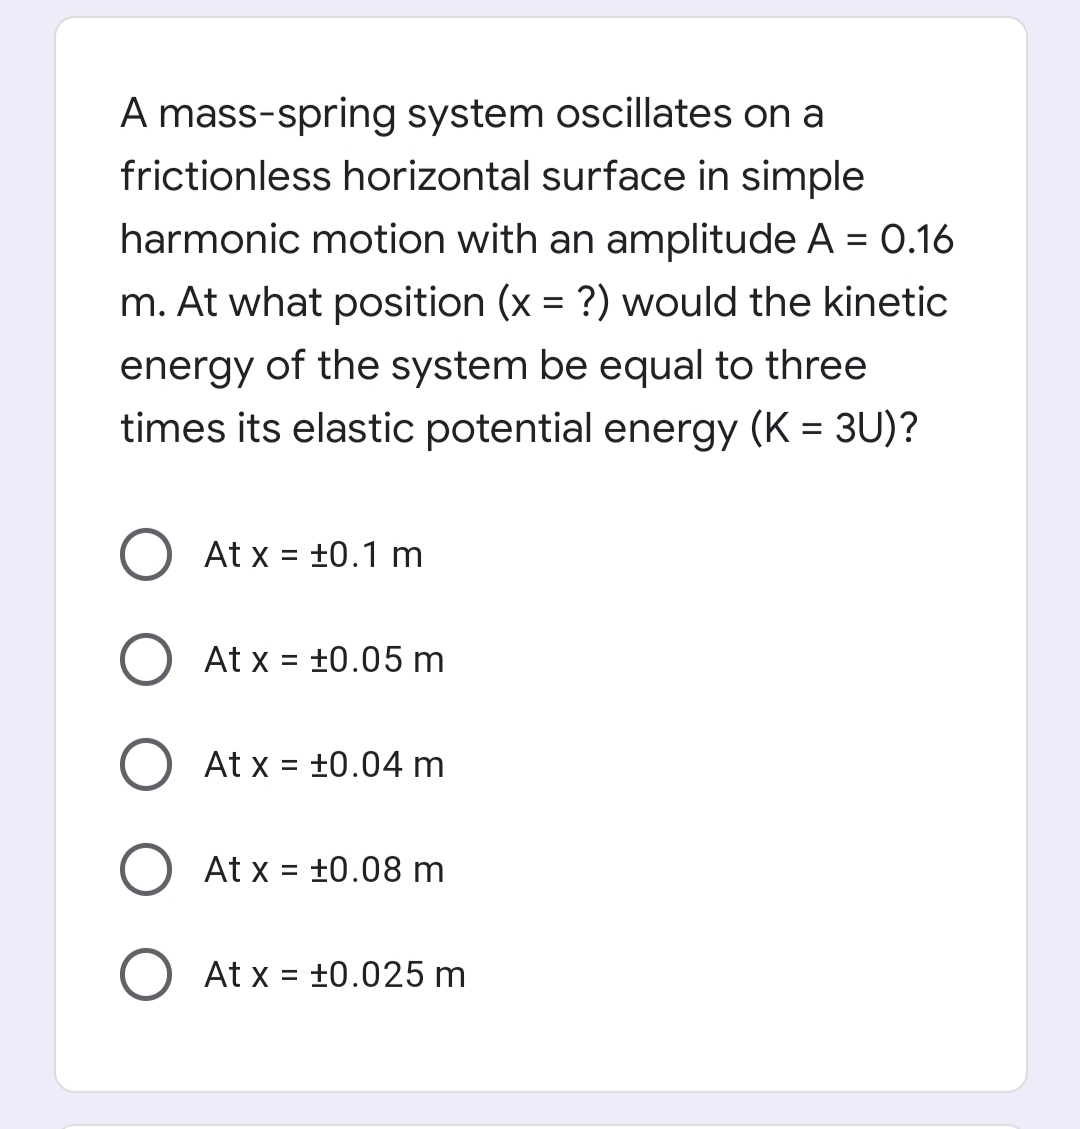 A mass-spring system oscillates on a
frictionless horizontal surface in simple
harmonic motion with an amplitude A = 0.16
m. At what position (x = ?) would the kinetic
energy of the system be equal to three
times its elastic potential energy (K = 3U)?
At x = +0.1 m
%D
At x = +0.05 m
At x = +0.04 m
%D
At x = +0.08 m
%D
At x = +0.025 m
